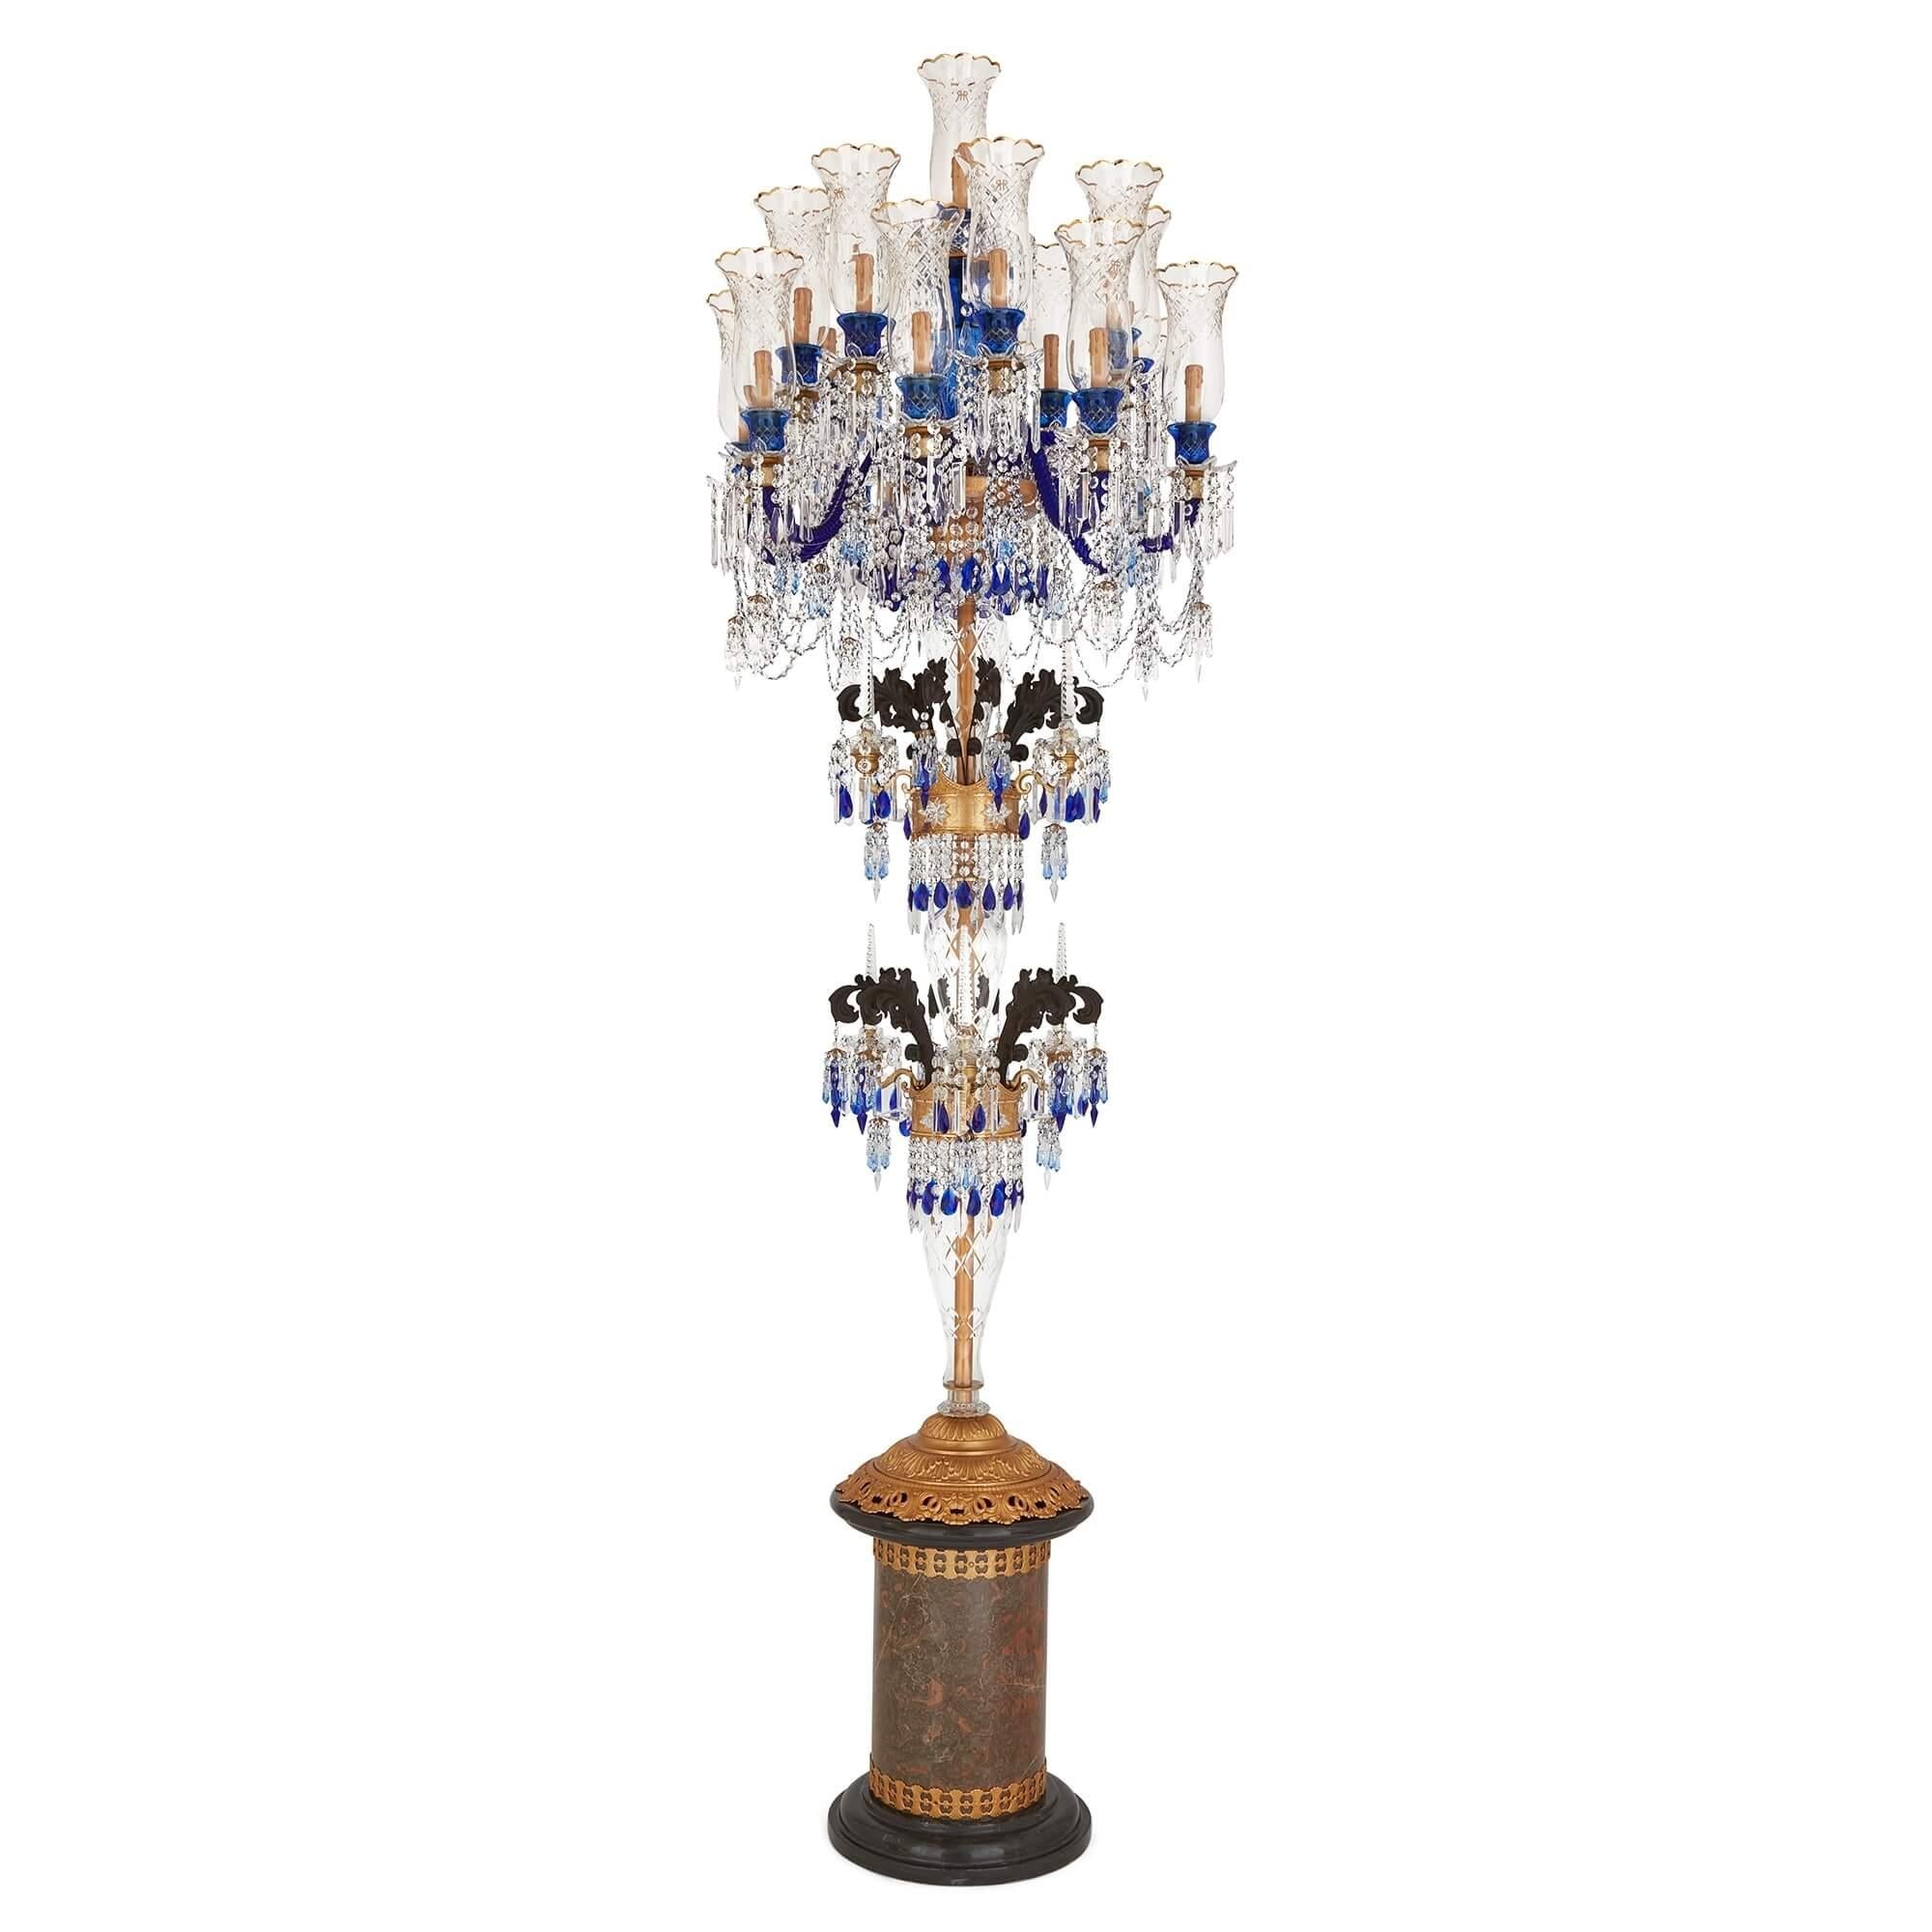 Pair of very large Bohemian blue and clear cut glass, marble and bronze candelabra
Bohemian, 20th Century 
Height 300cm, width 110cm, depth 110cm

This monumental pair of 20th century Bohemian candelabra is crafted from a selection of high quality